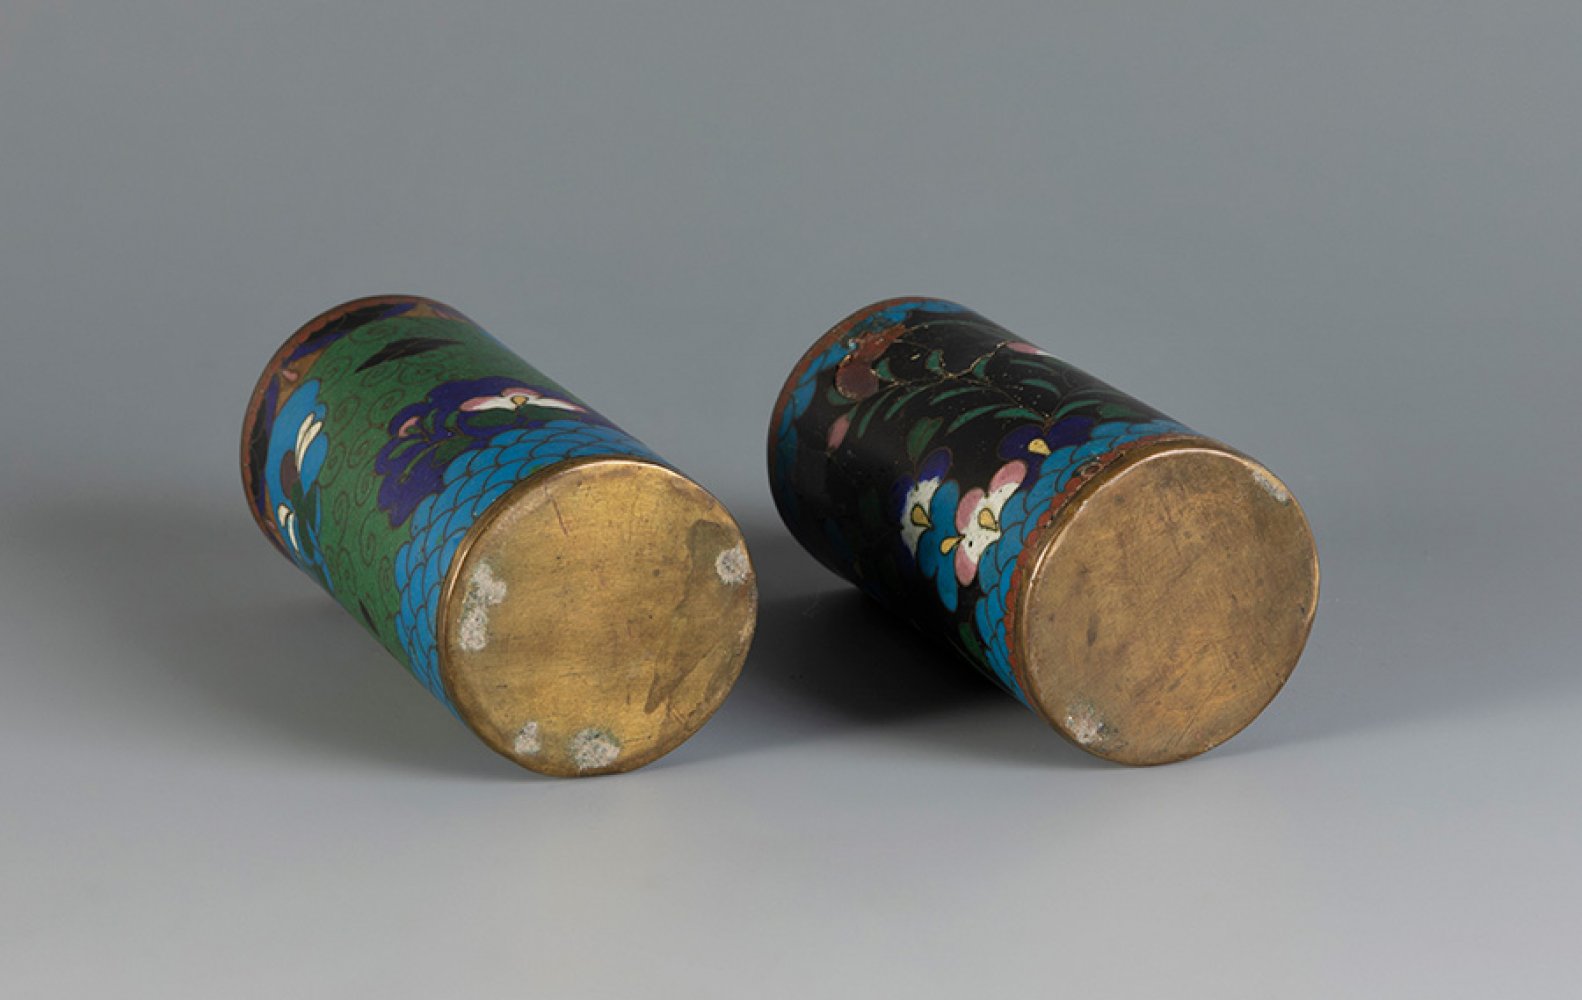 Two brush pots. Japan, Edo period, 19th century.Bronze and cloisonné enamels.With marks of use. - Image 4 of 4